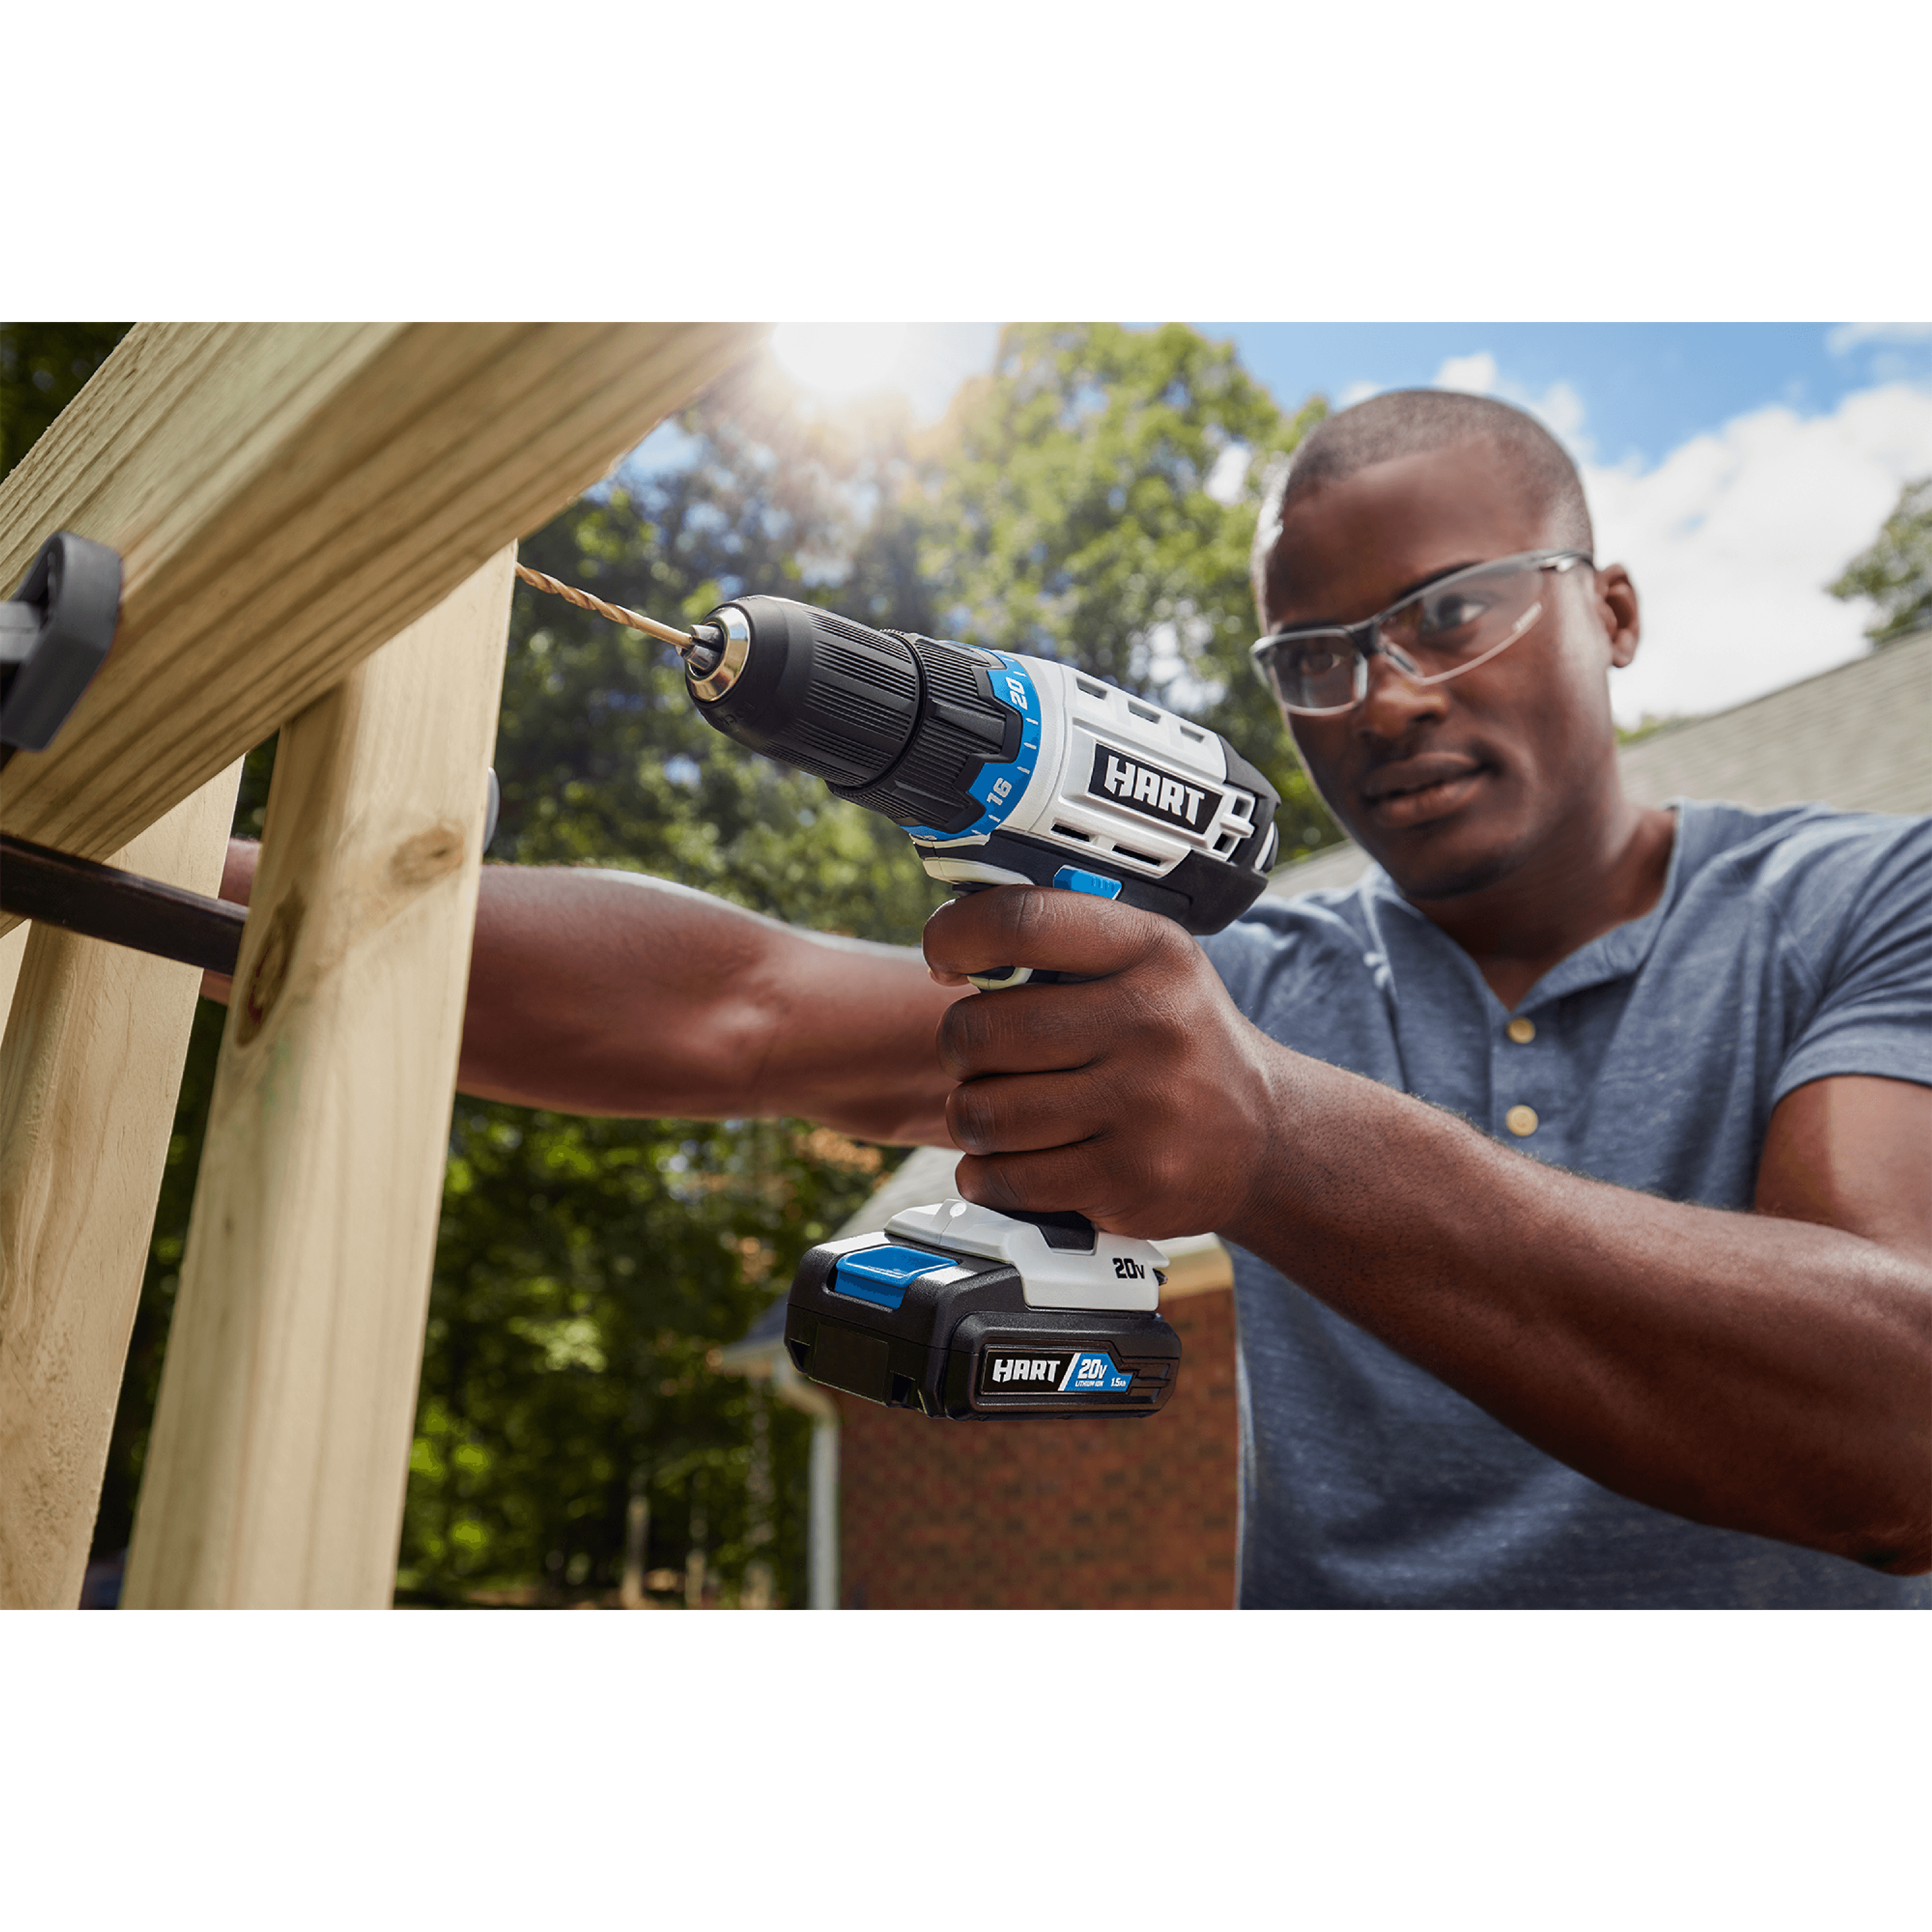 HART 20-Volt Cordless 1/2-inch Drill/Driver Kit (1) 1.5Ah Lithium-Ion Battery - image 9 of 17